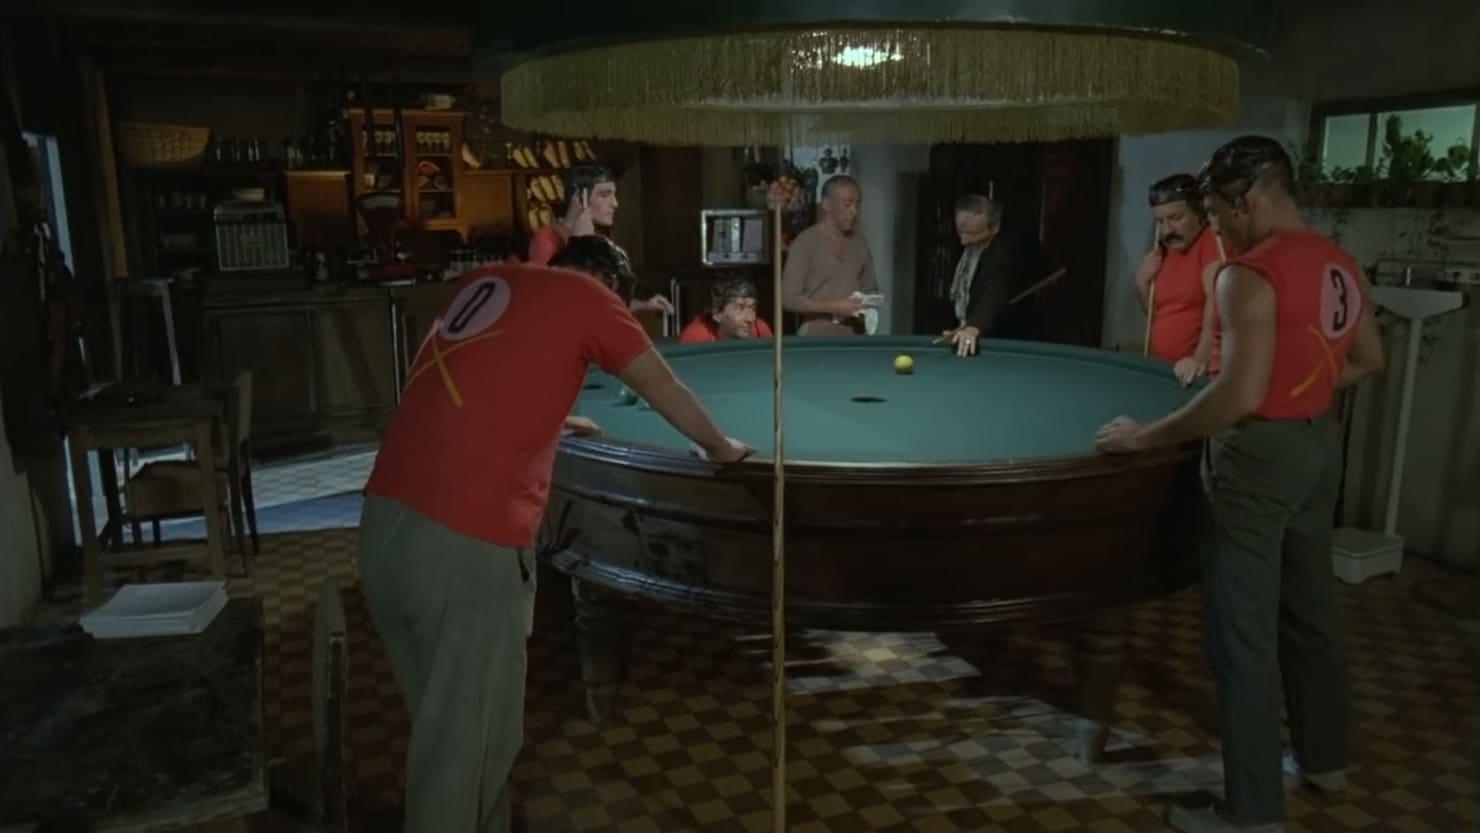 The Story of One Billiard-Room backdrop